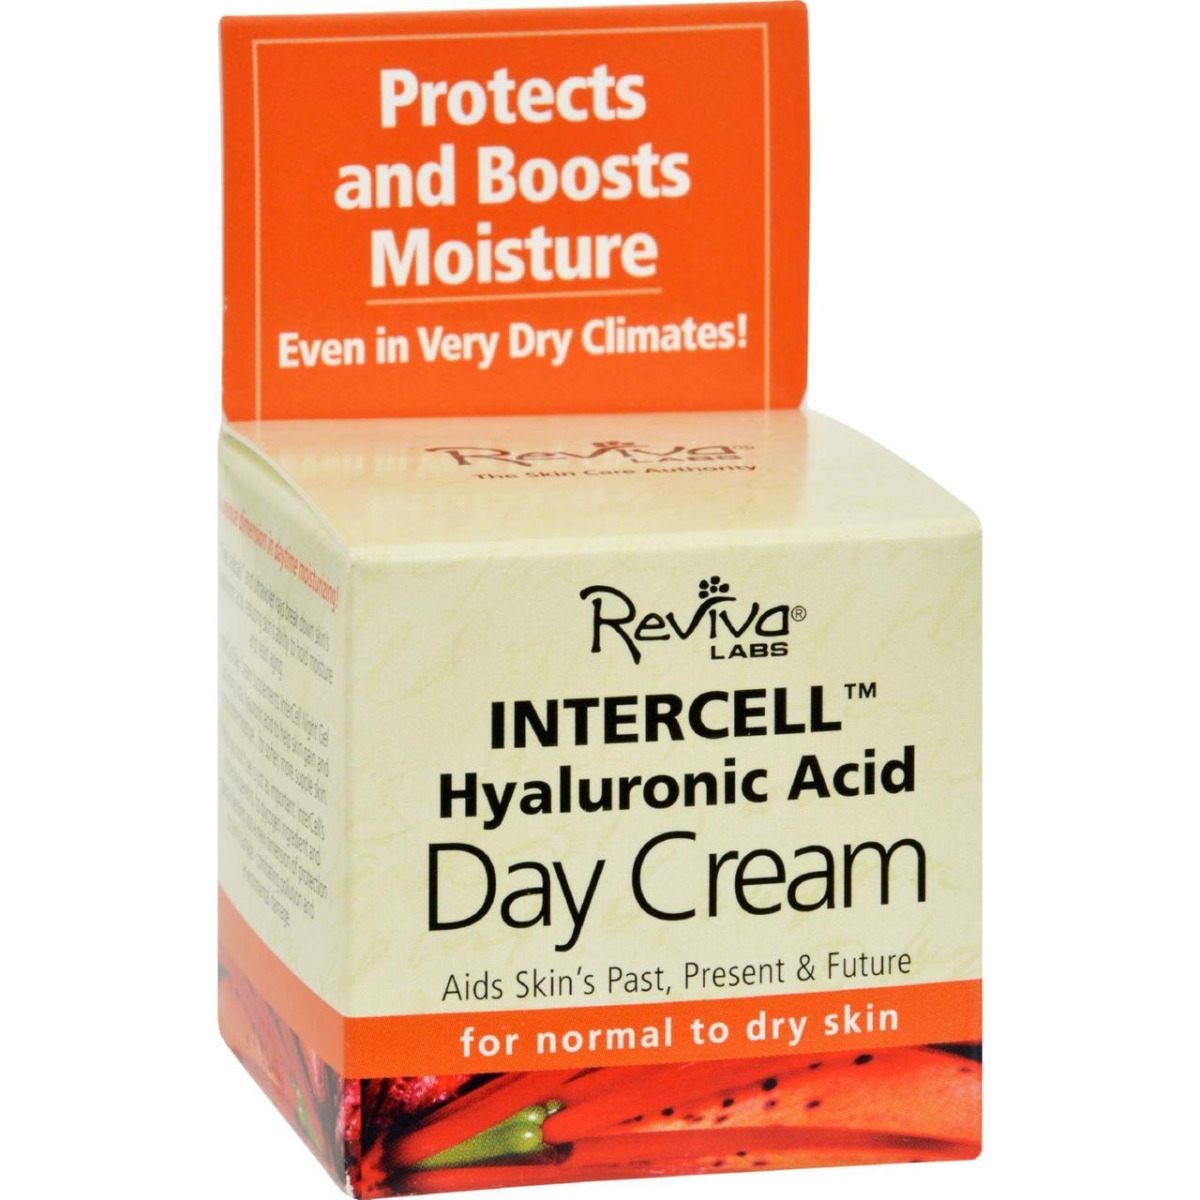 Hg0830661 1.5 Oz Intercell Day Cream With Hyaluronic Acid